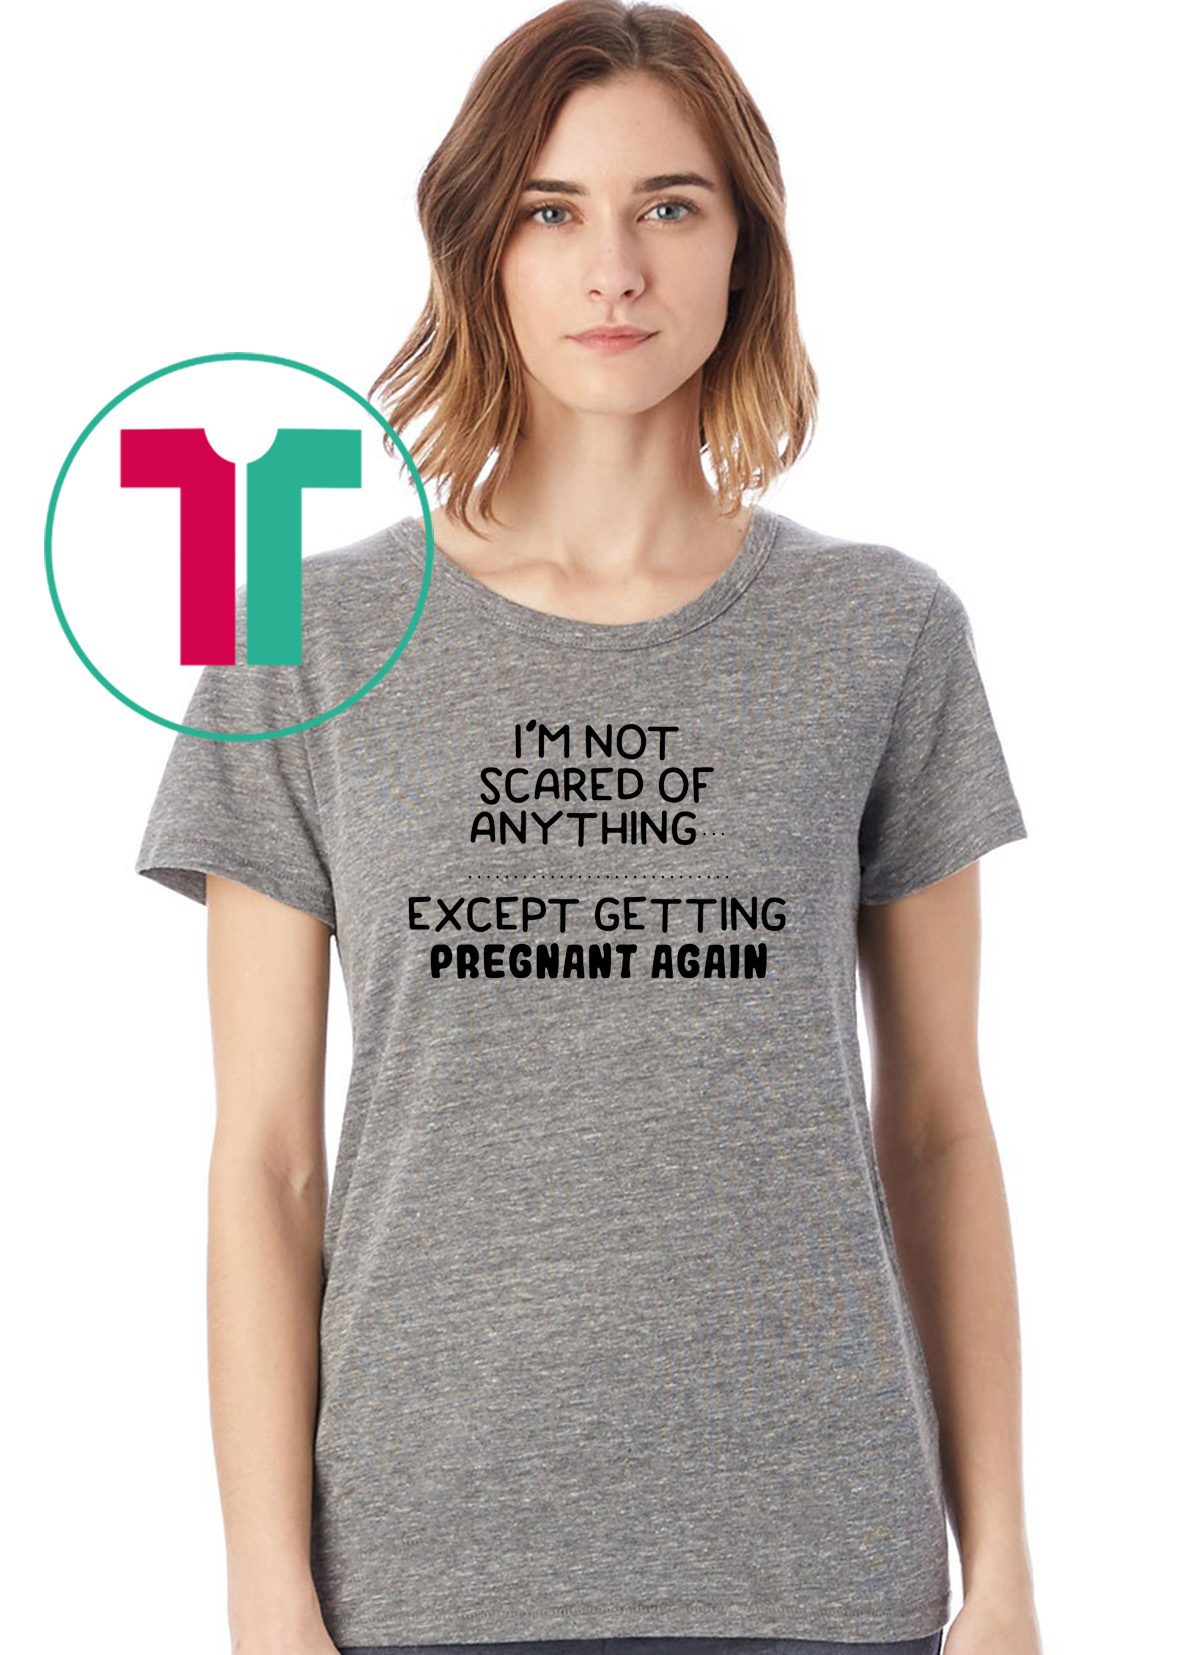 I'm not scared of anything except getting pregnant again shirt